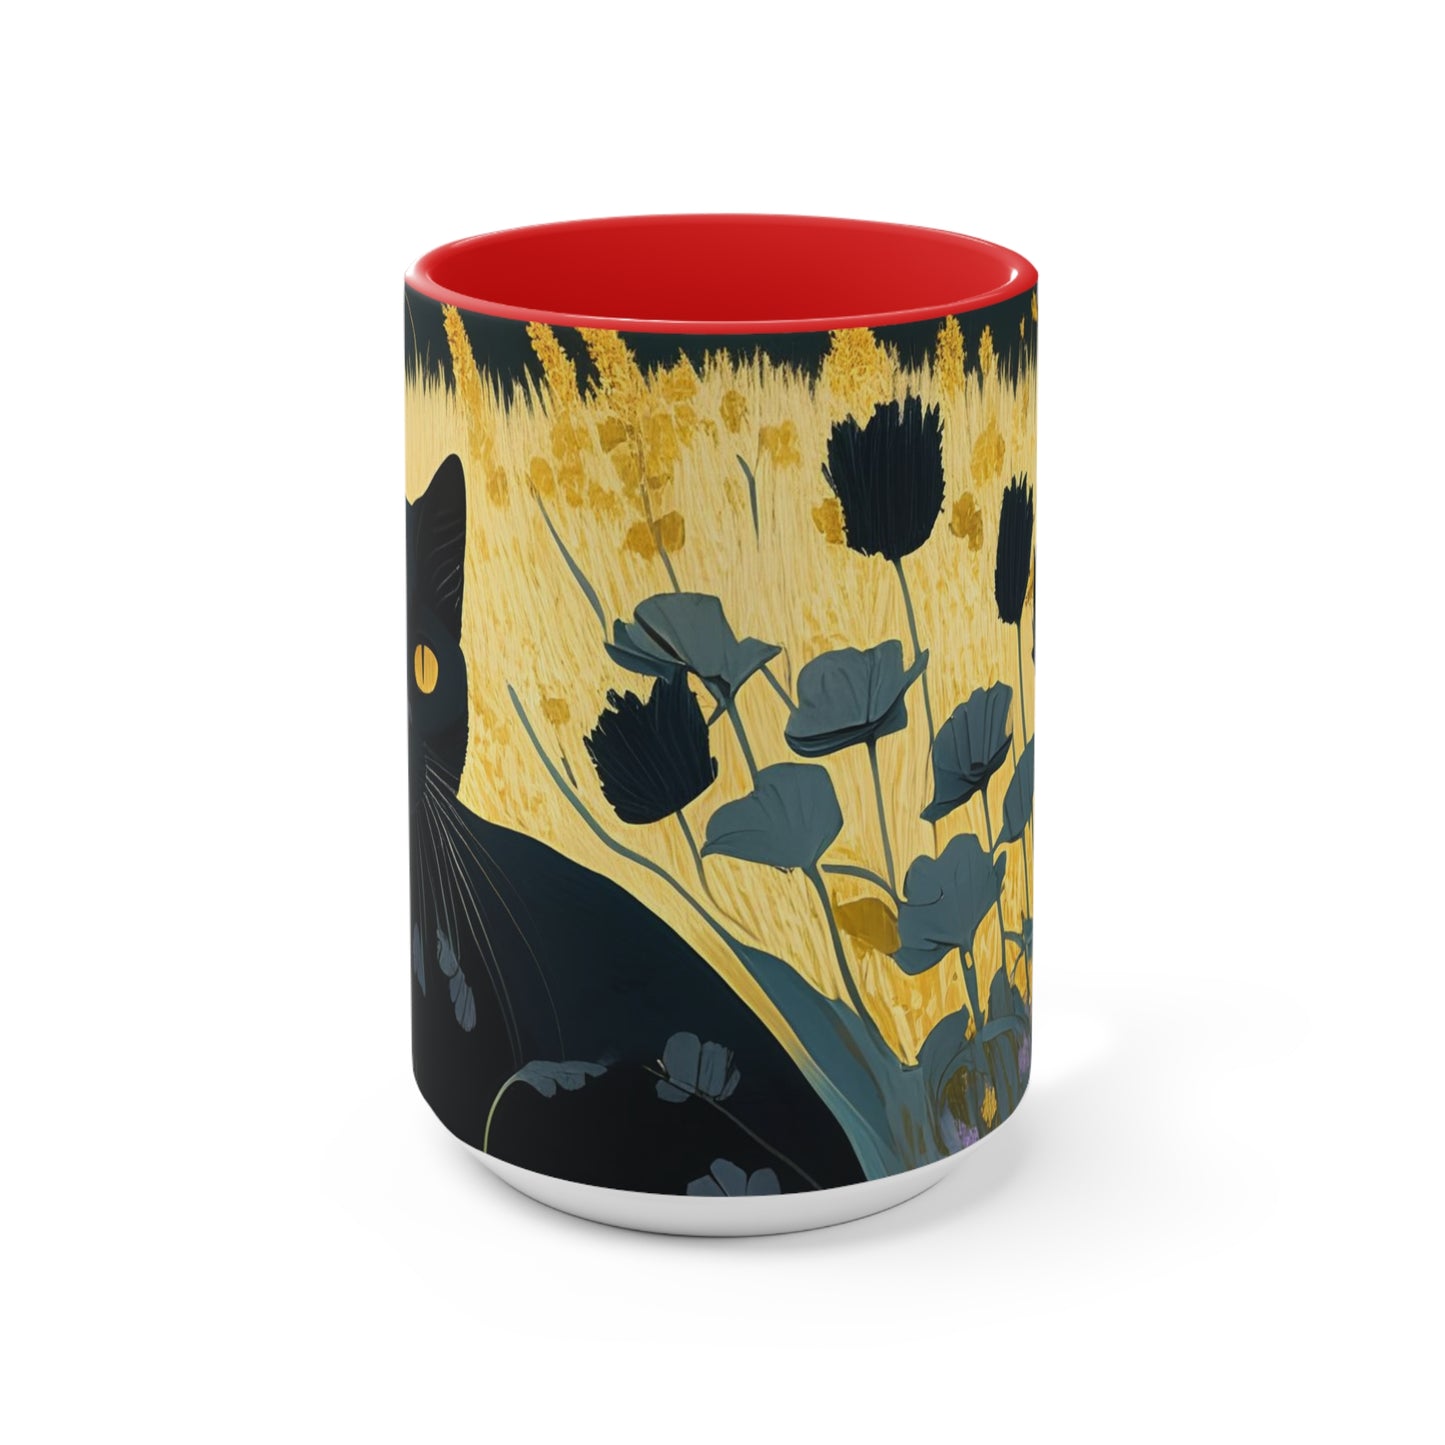 Black Cat with Black Flowers, Ceramic Mug - Perfect for Coffee, Tea, and More!